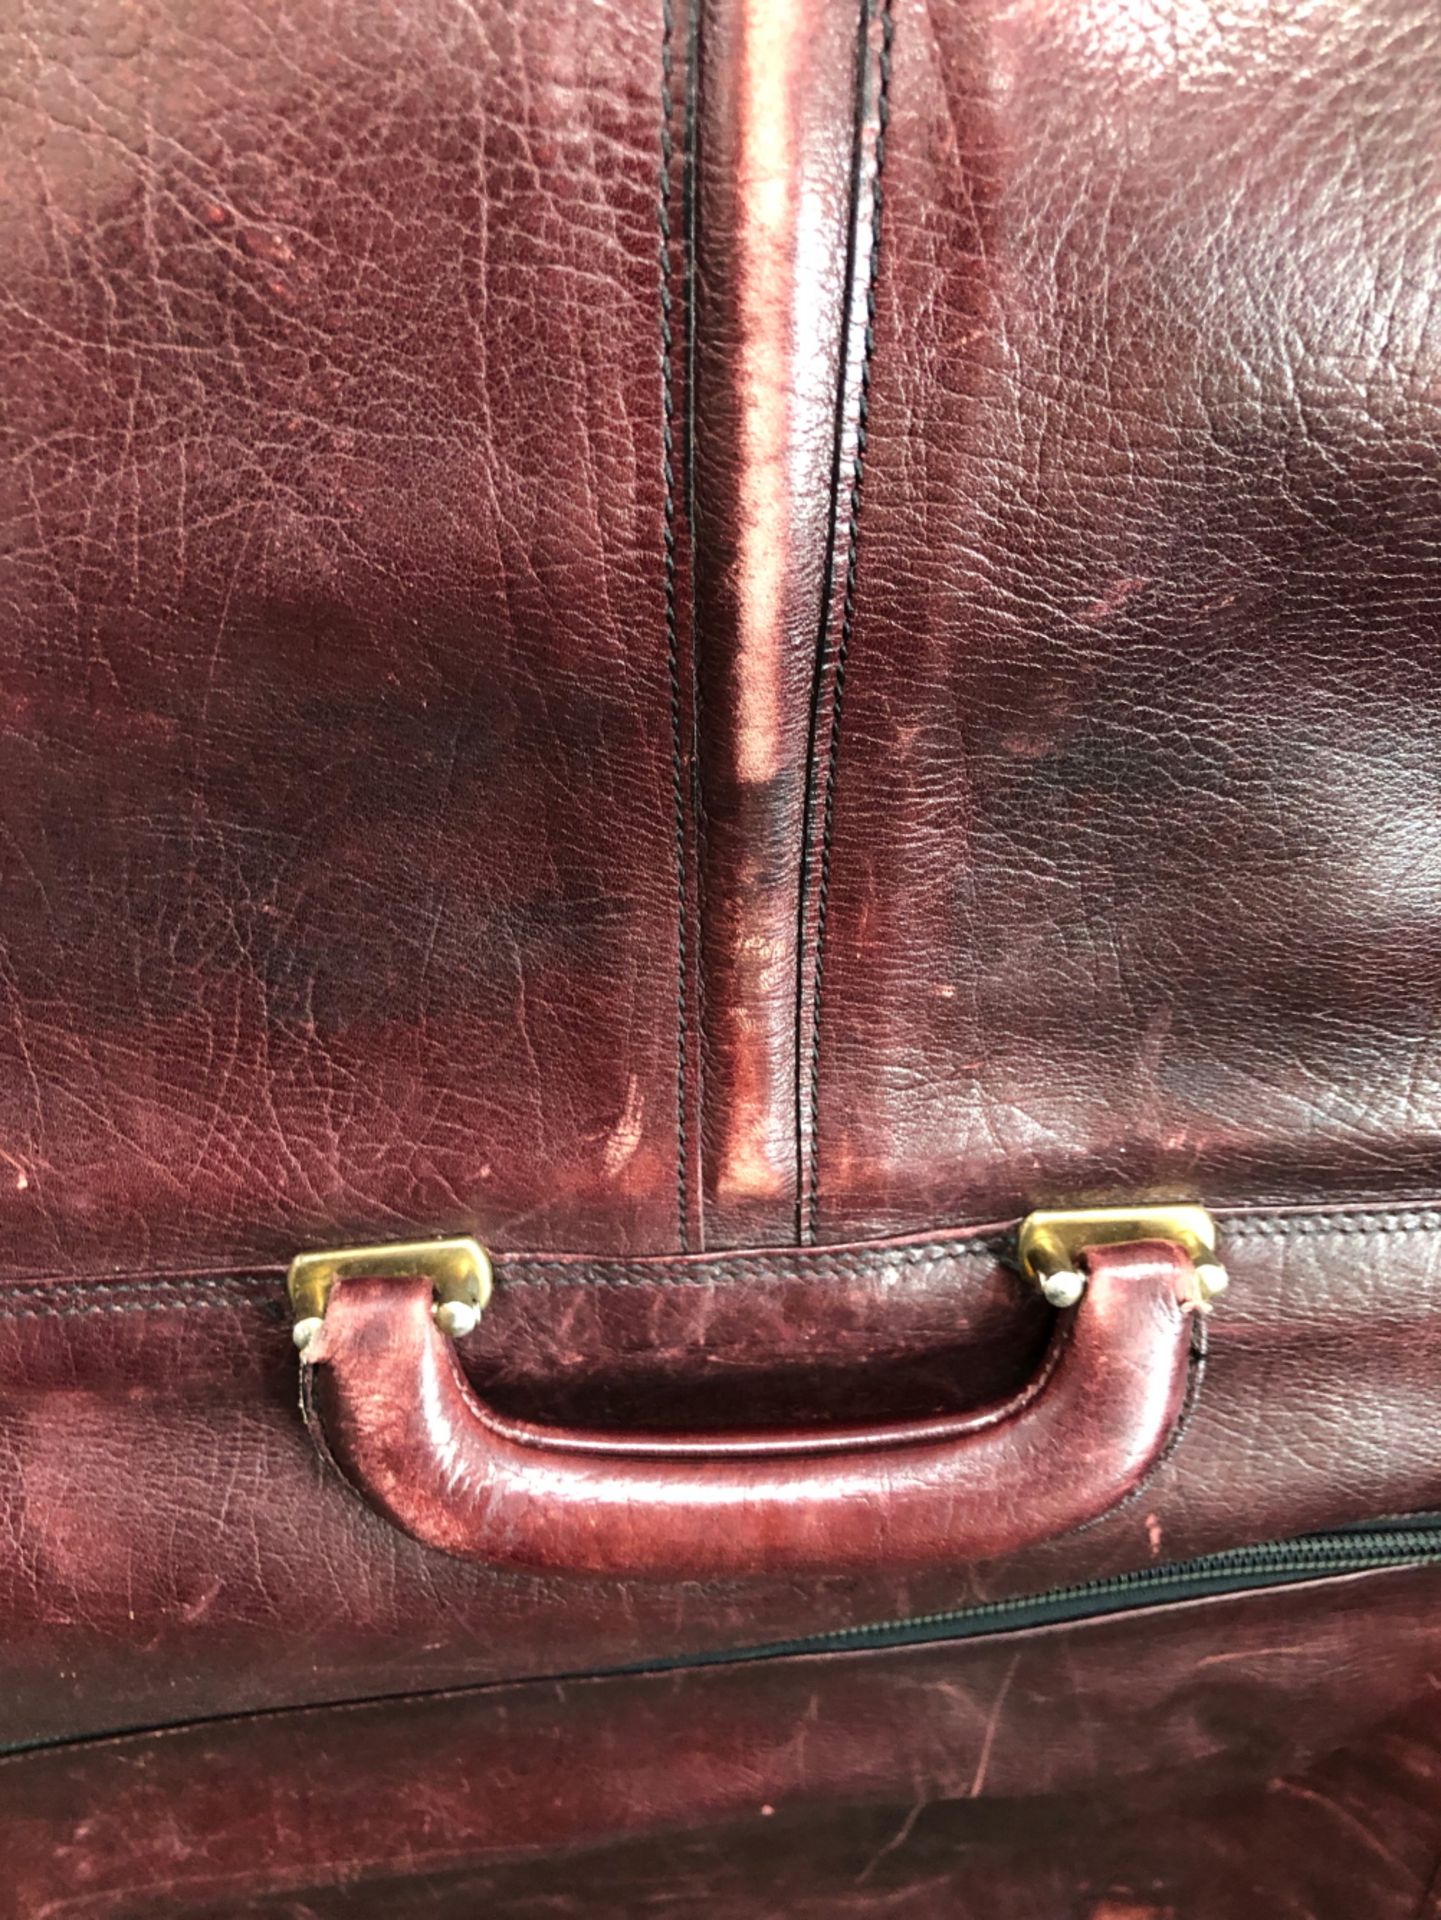 A BURGUNDY HEAVY LEATHER SUIT CARRIER WITH A BLACK SUEDETTE TRAVEL BAG (2) - Image 4 of 10